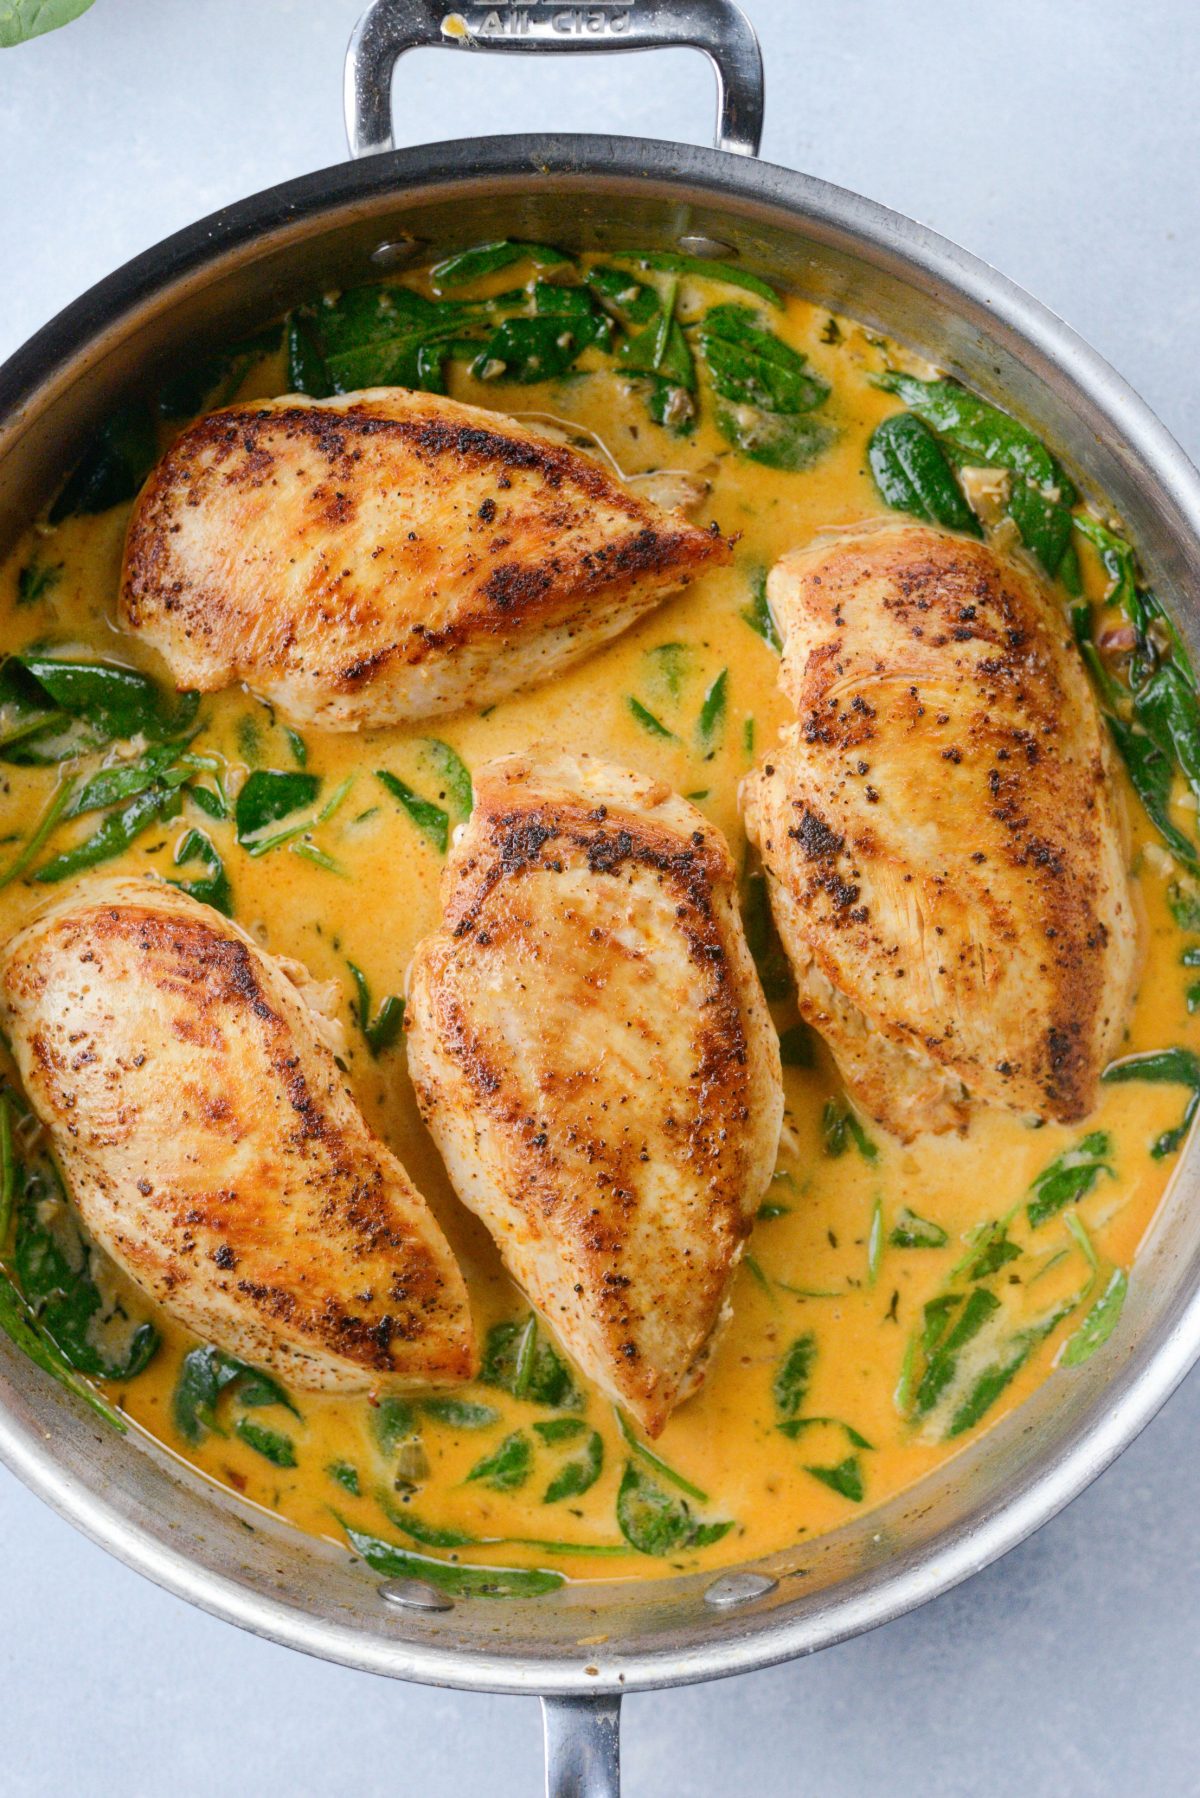 return chicken to the pan